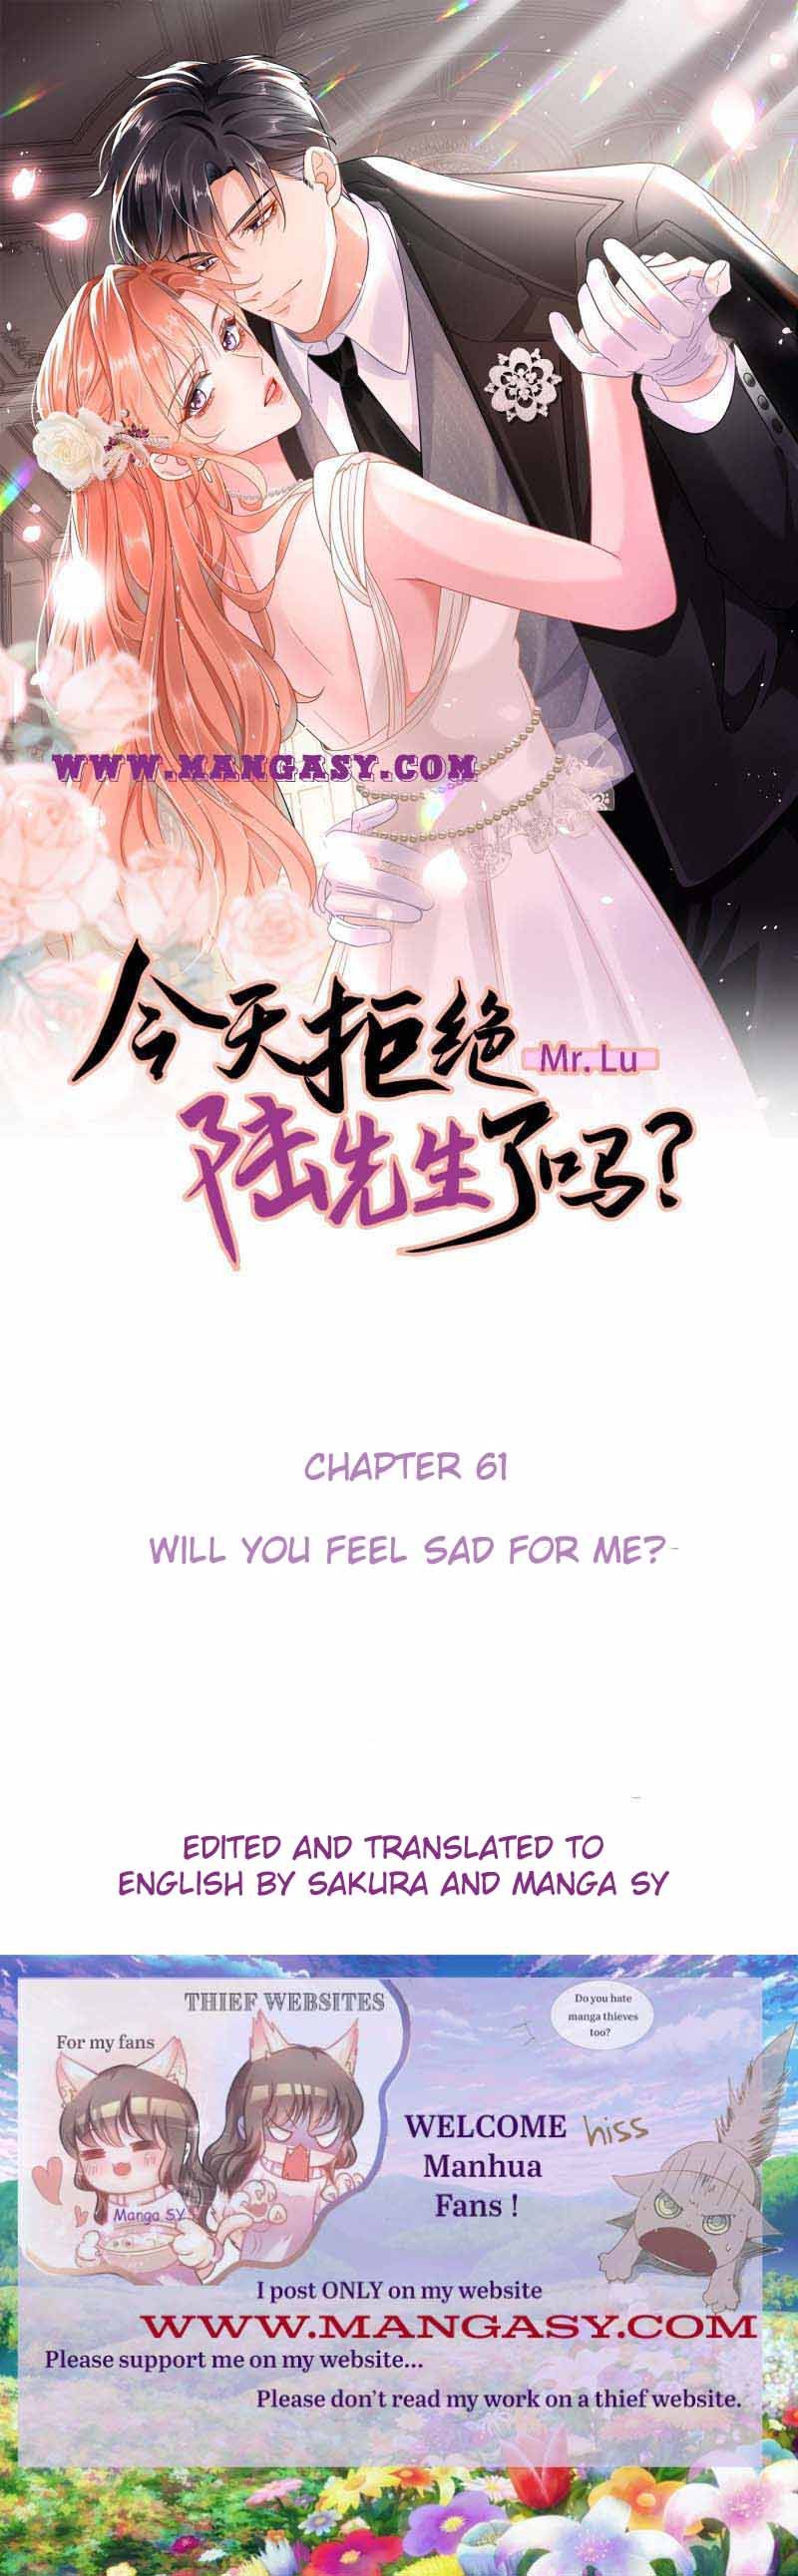 Did You Reject Mr.Lu Today? Chapter 61